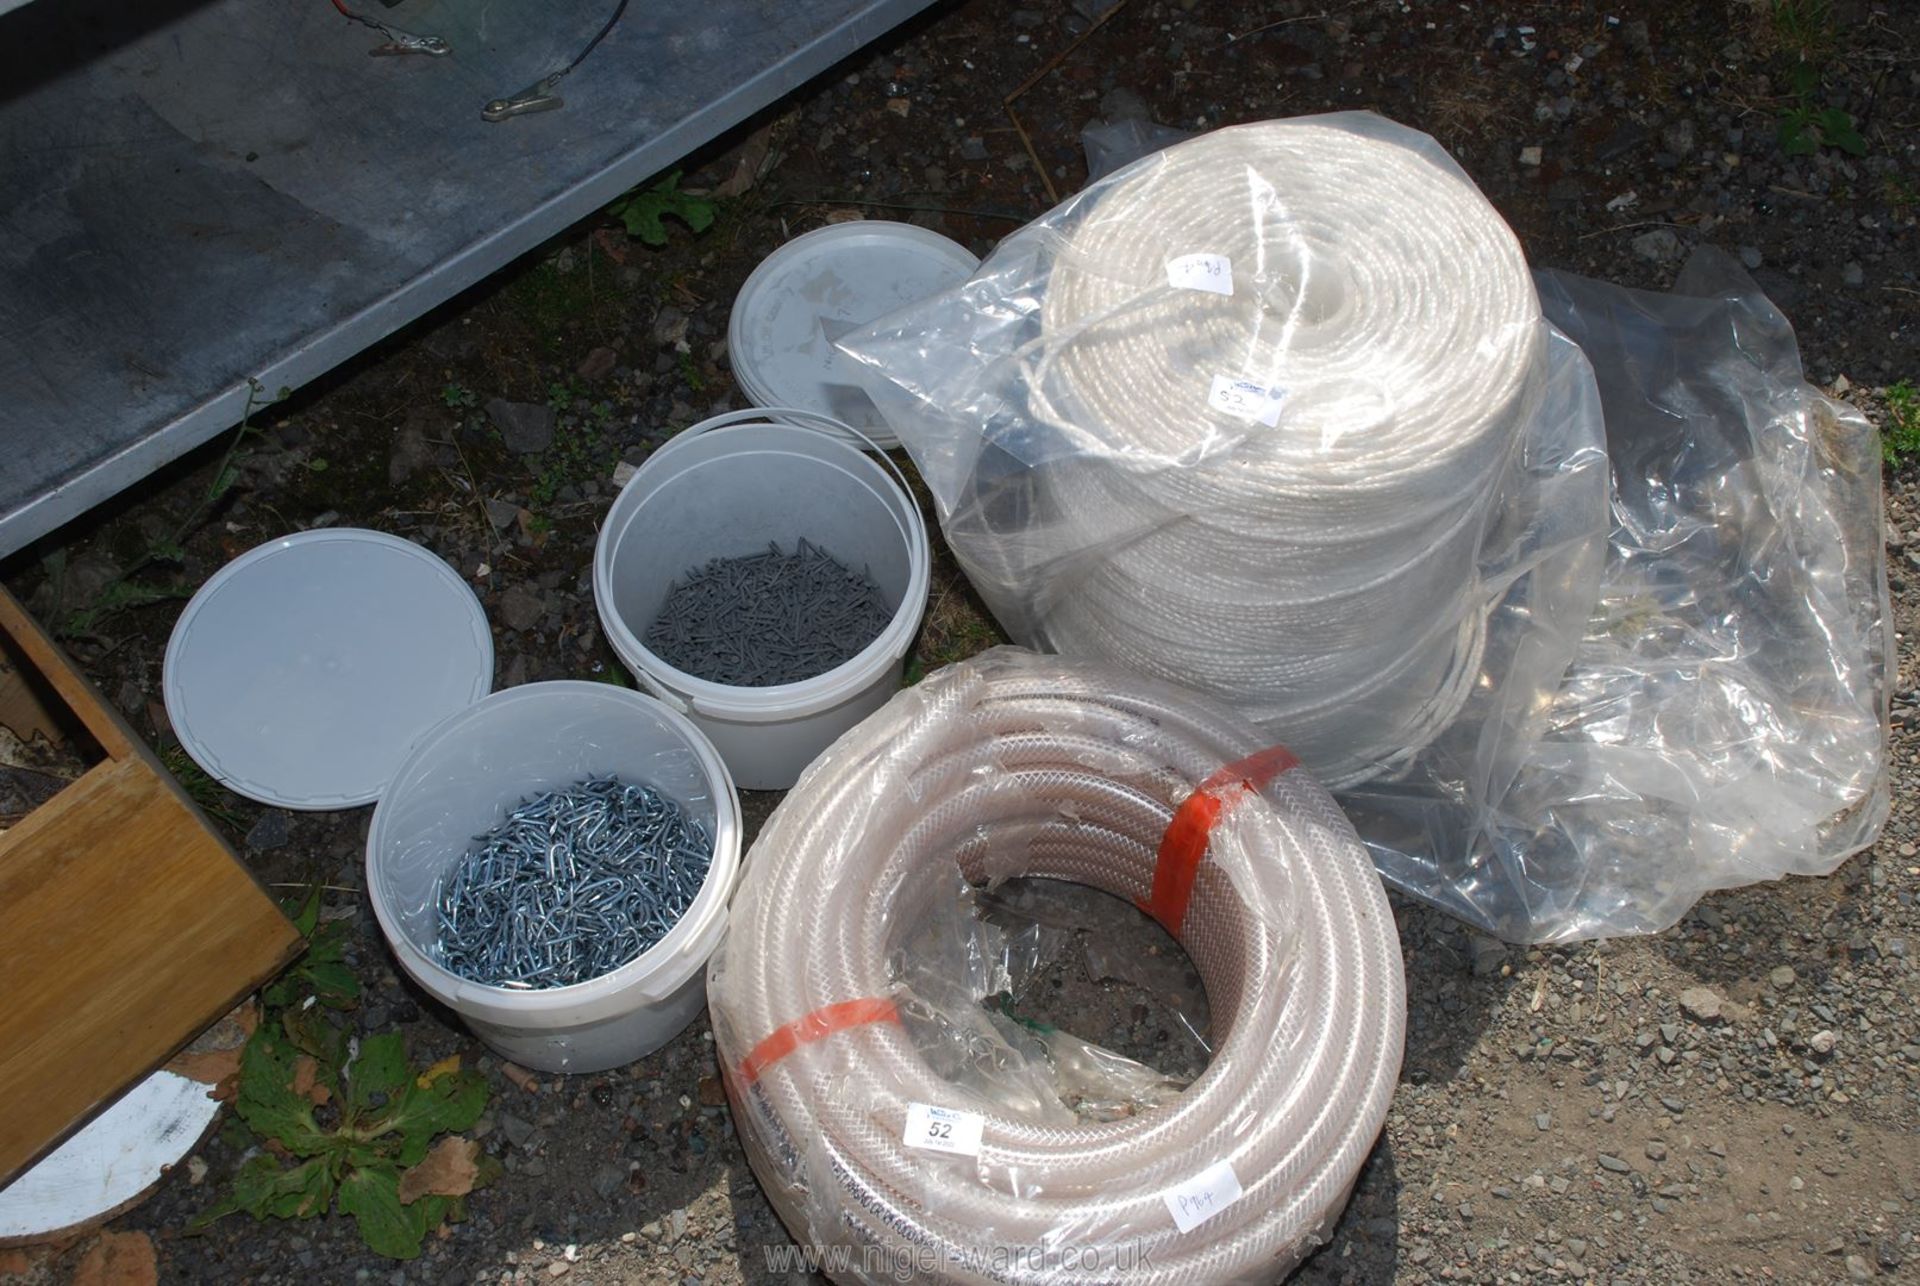 Roll of 15 ml reinforced plastic tubing, tubs of nails,